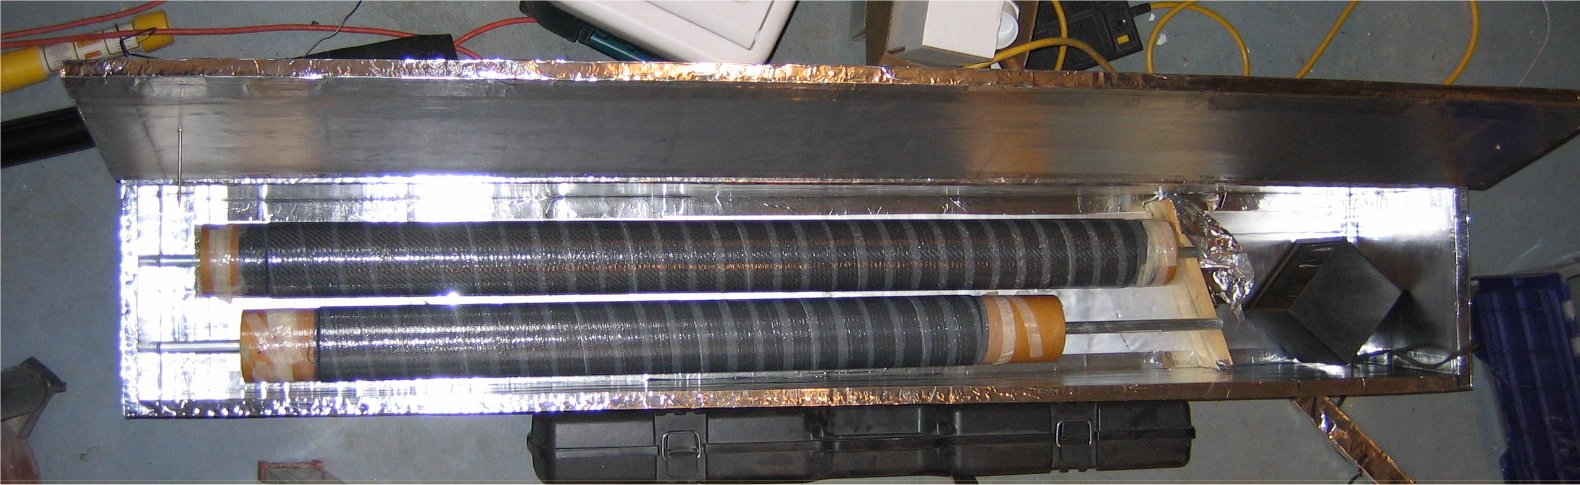 Composites Curing Oven - UAVOS